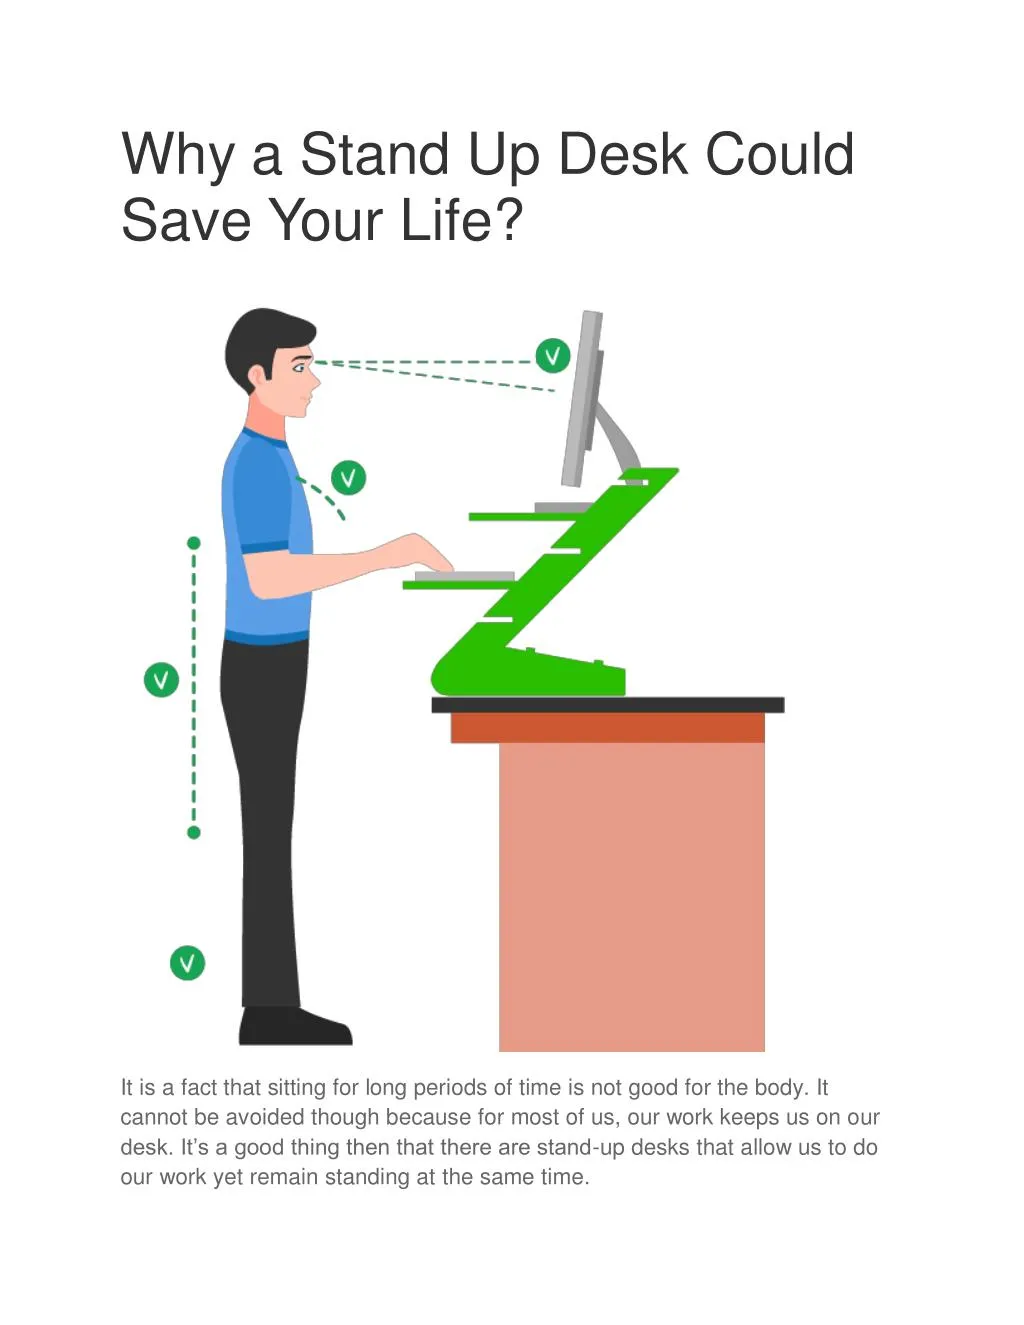 why a stand up desk could save your life